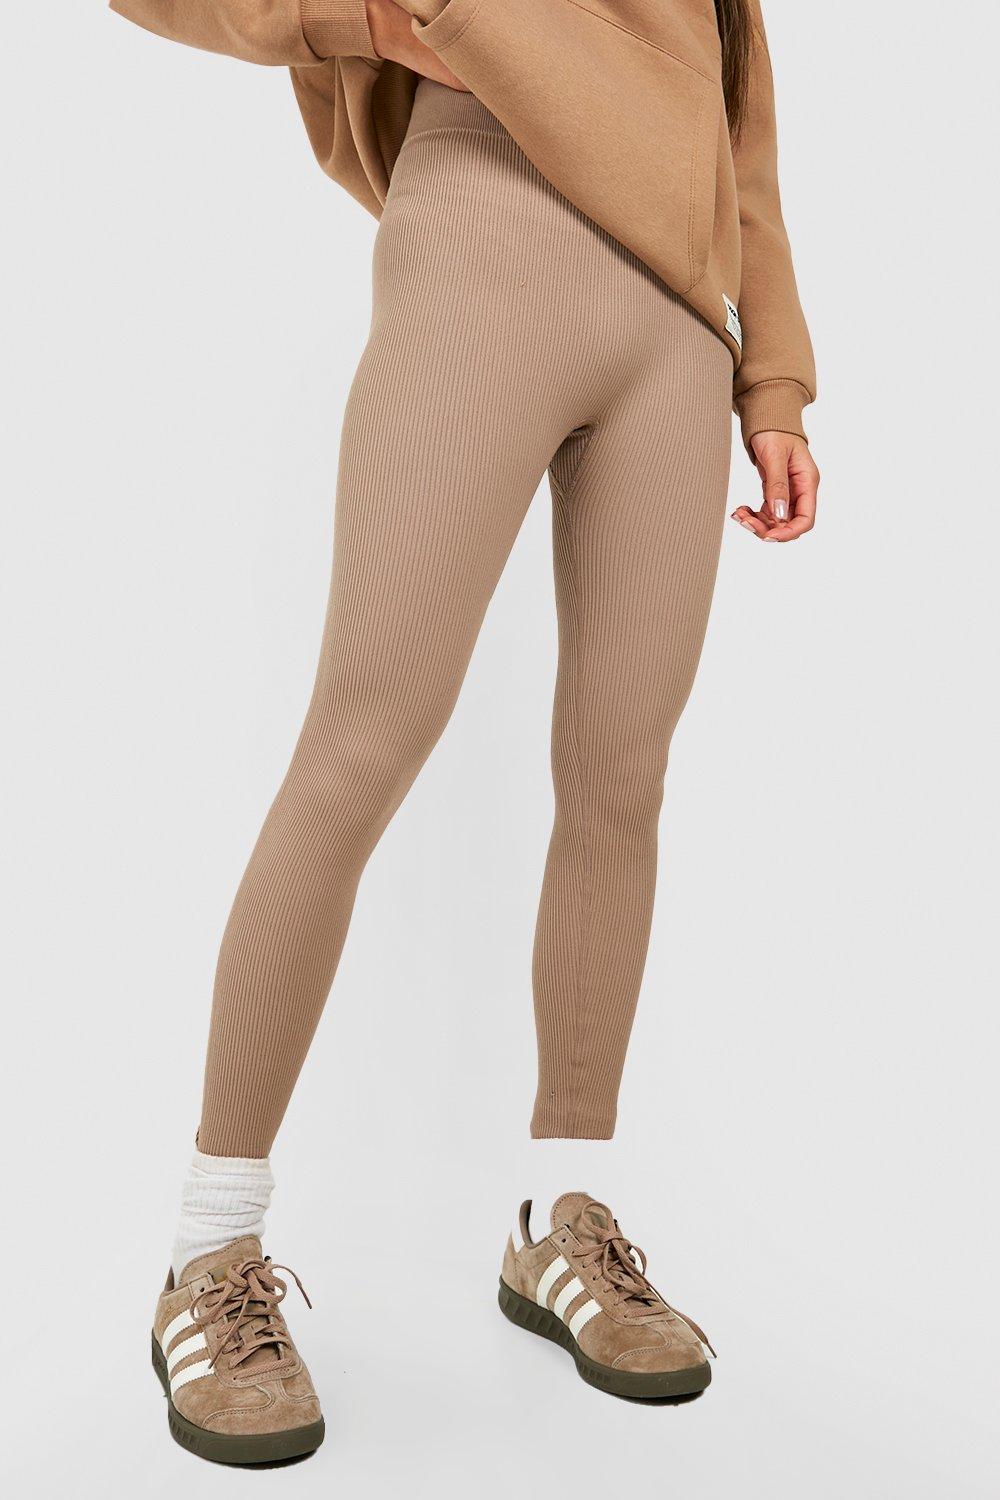 Get the Best Selection of Structured Seamless Contour Ribbed Sculpt  Leggings Premium with Latest Fashions and Reliability